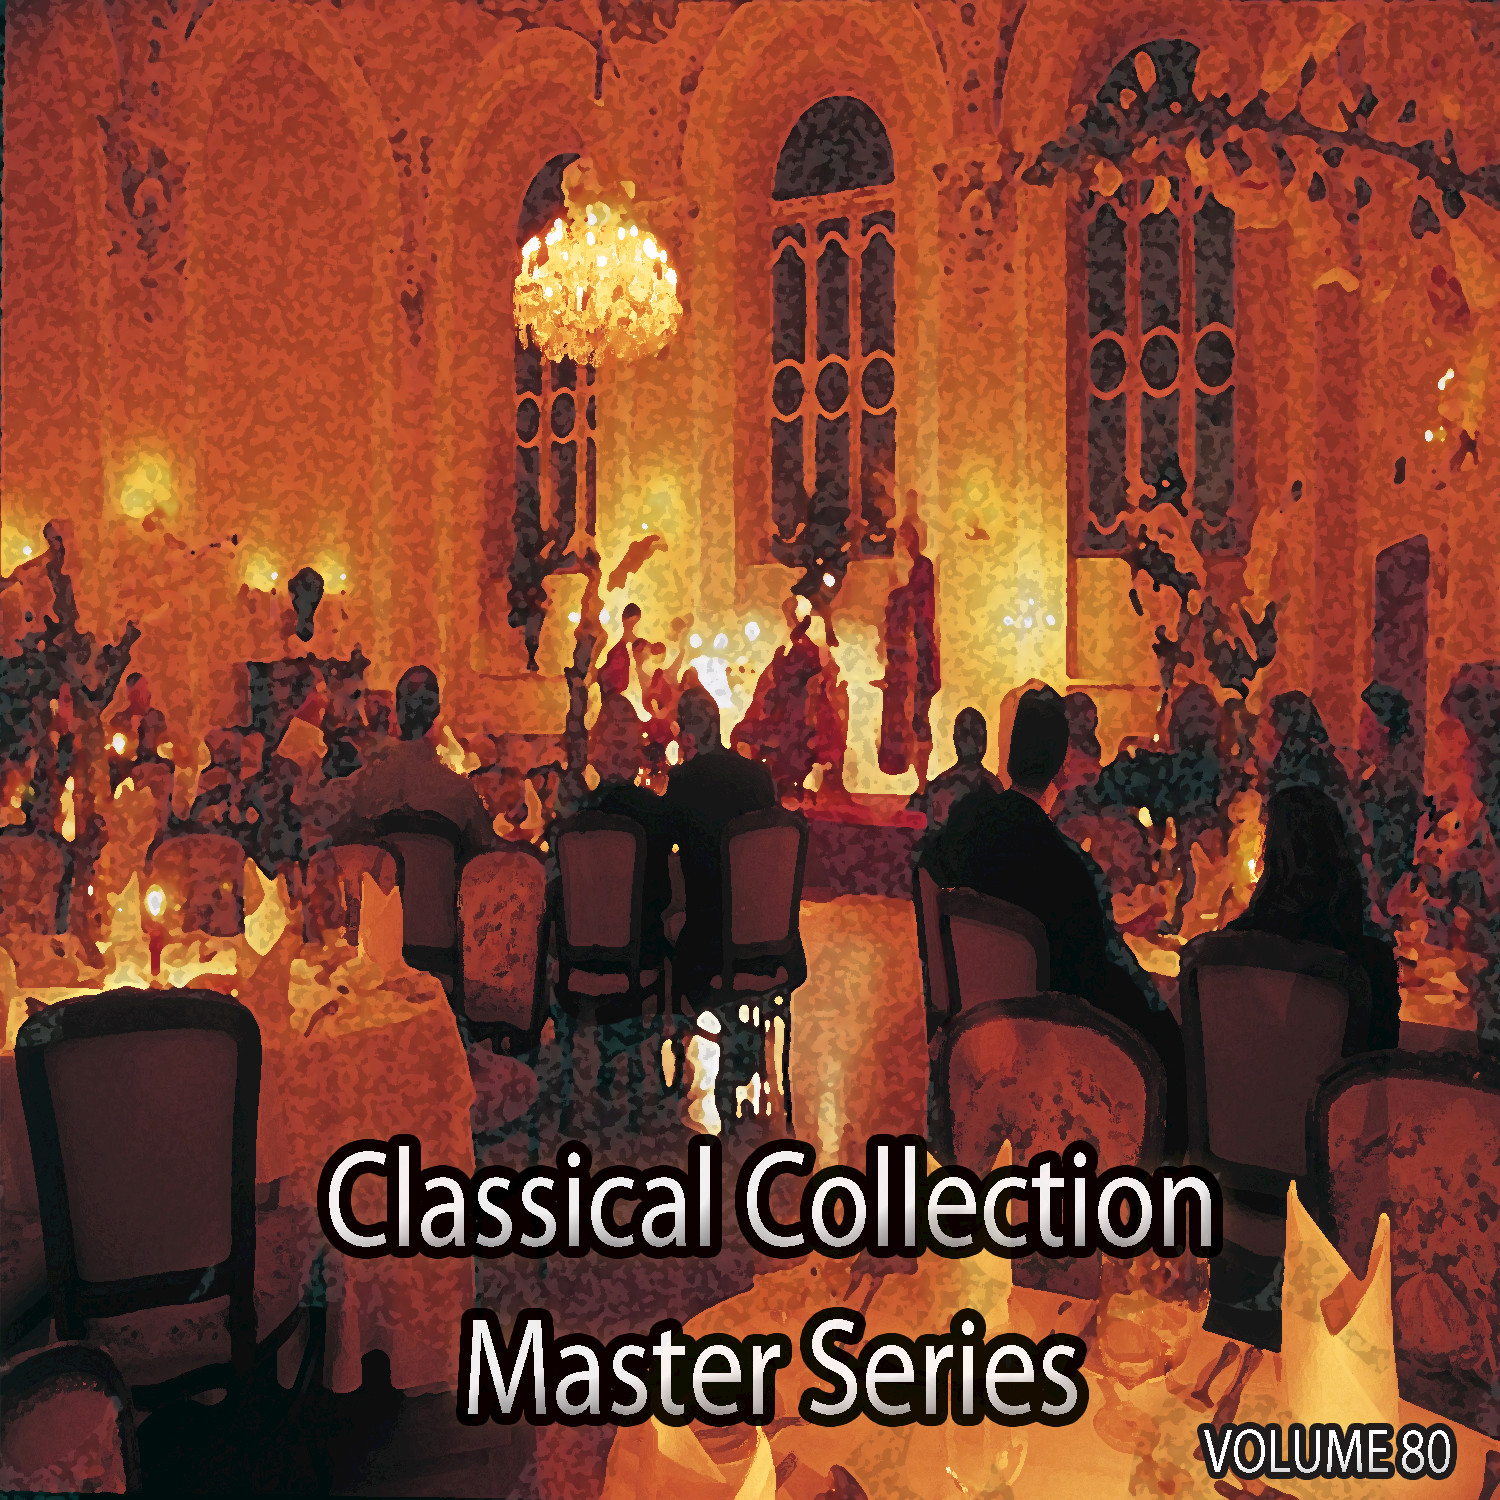 Concert Suite for Violin & Orchestra, Op. 28: III. Fairy tale